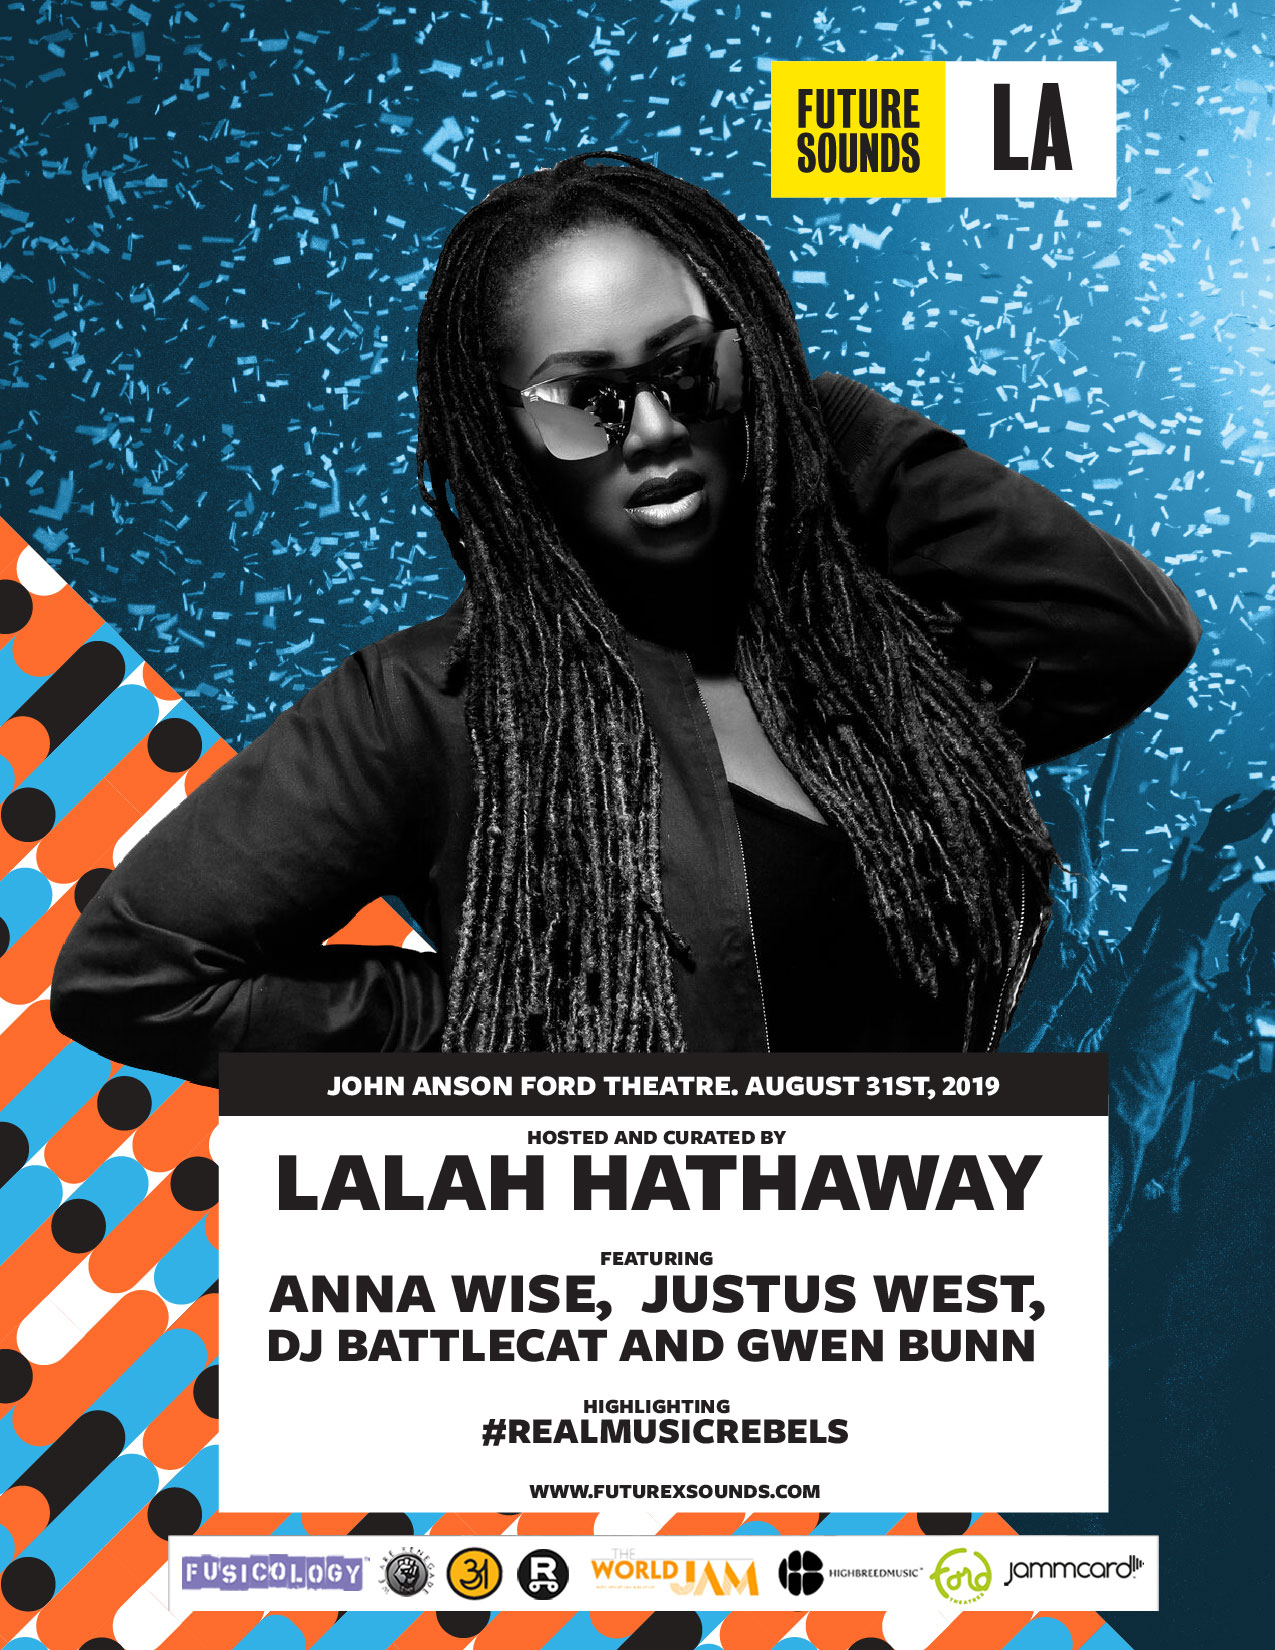 Future x Sounds LA: Hosted & curated by Lalah Hathaway